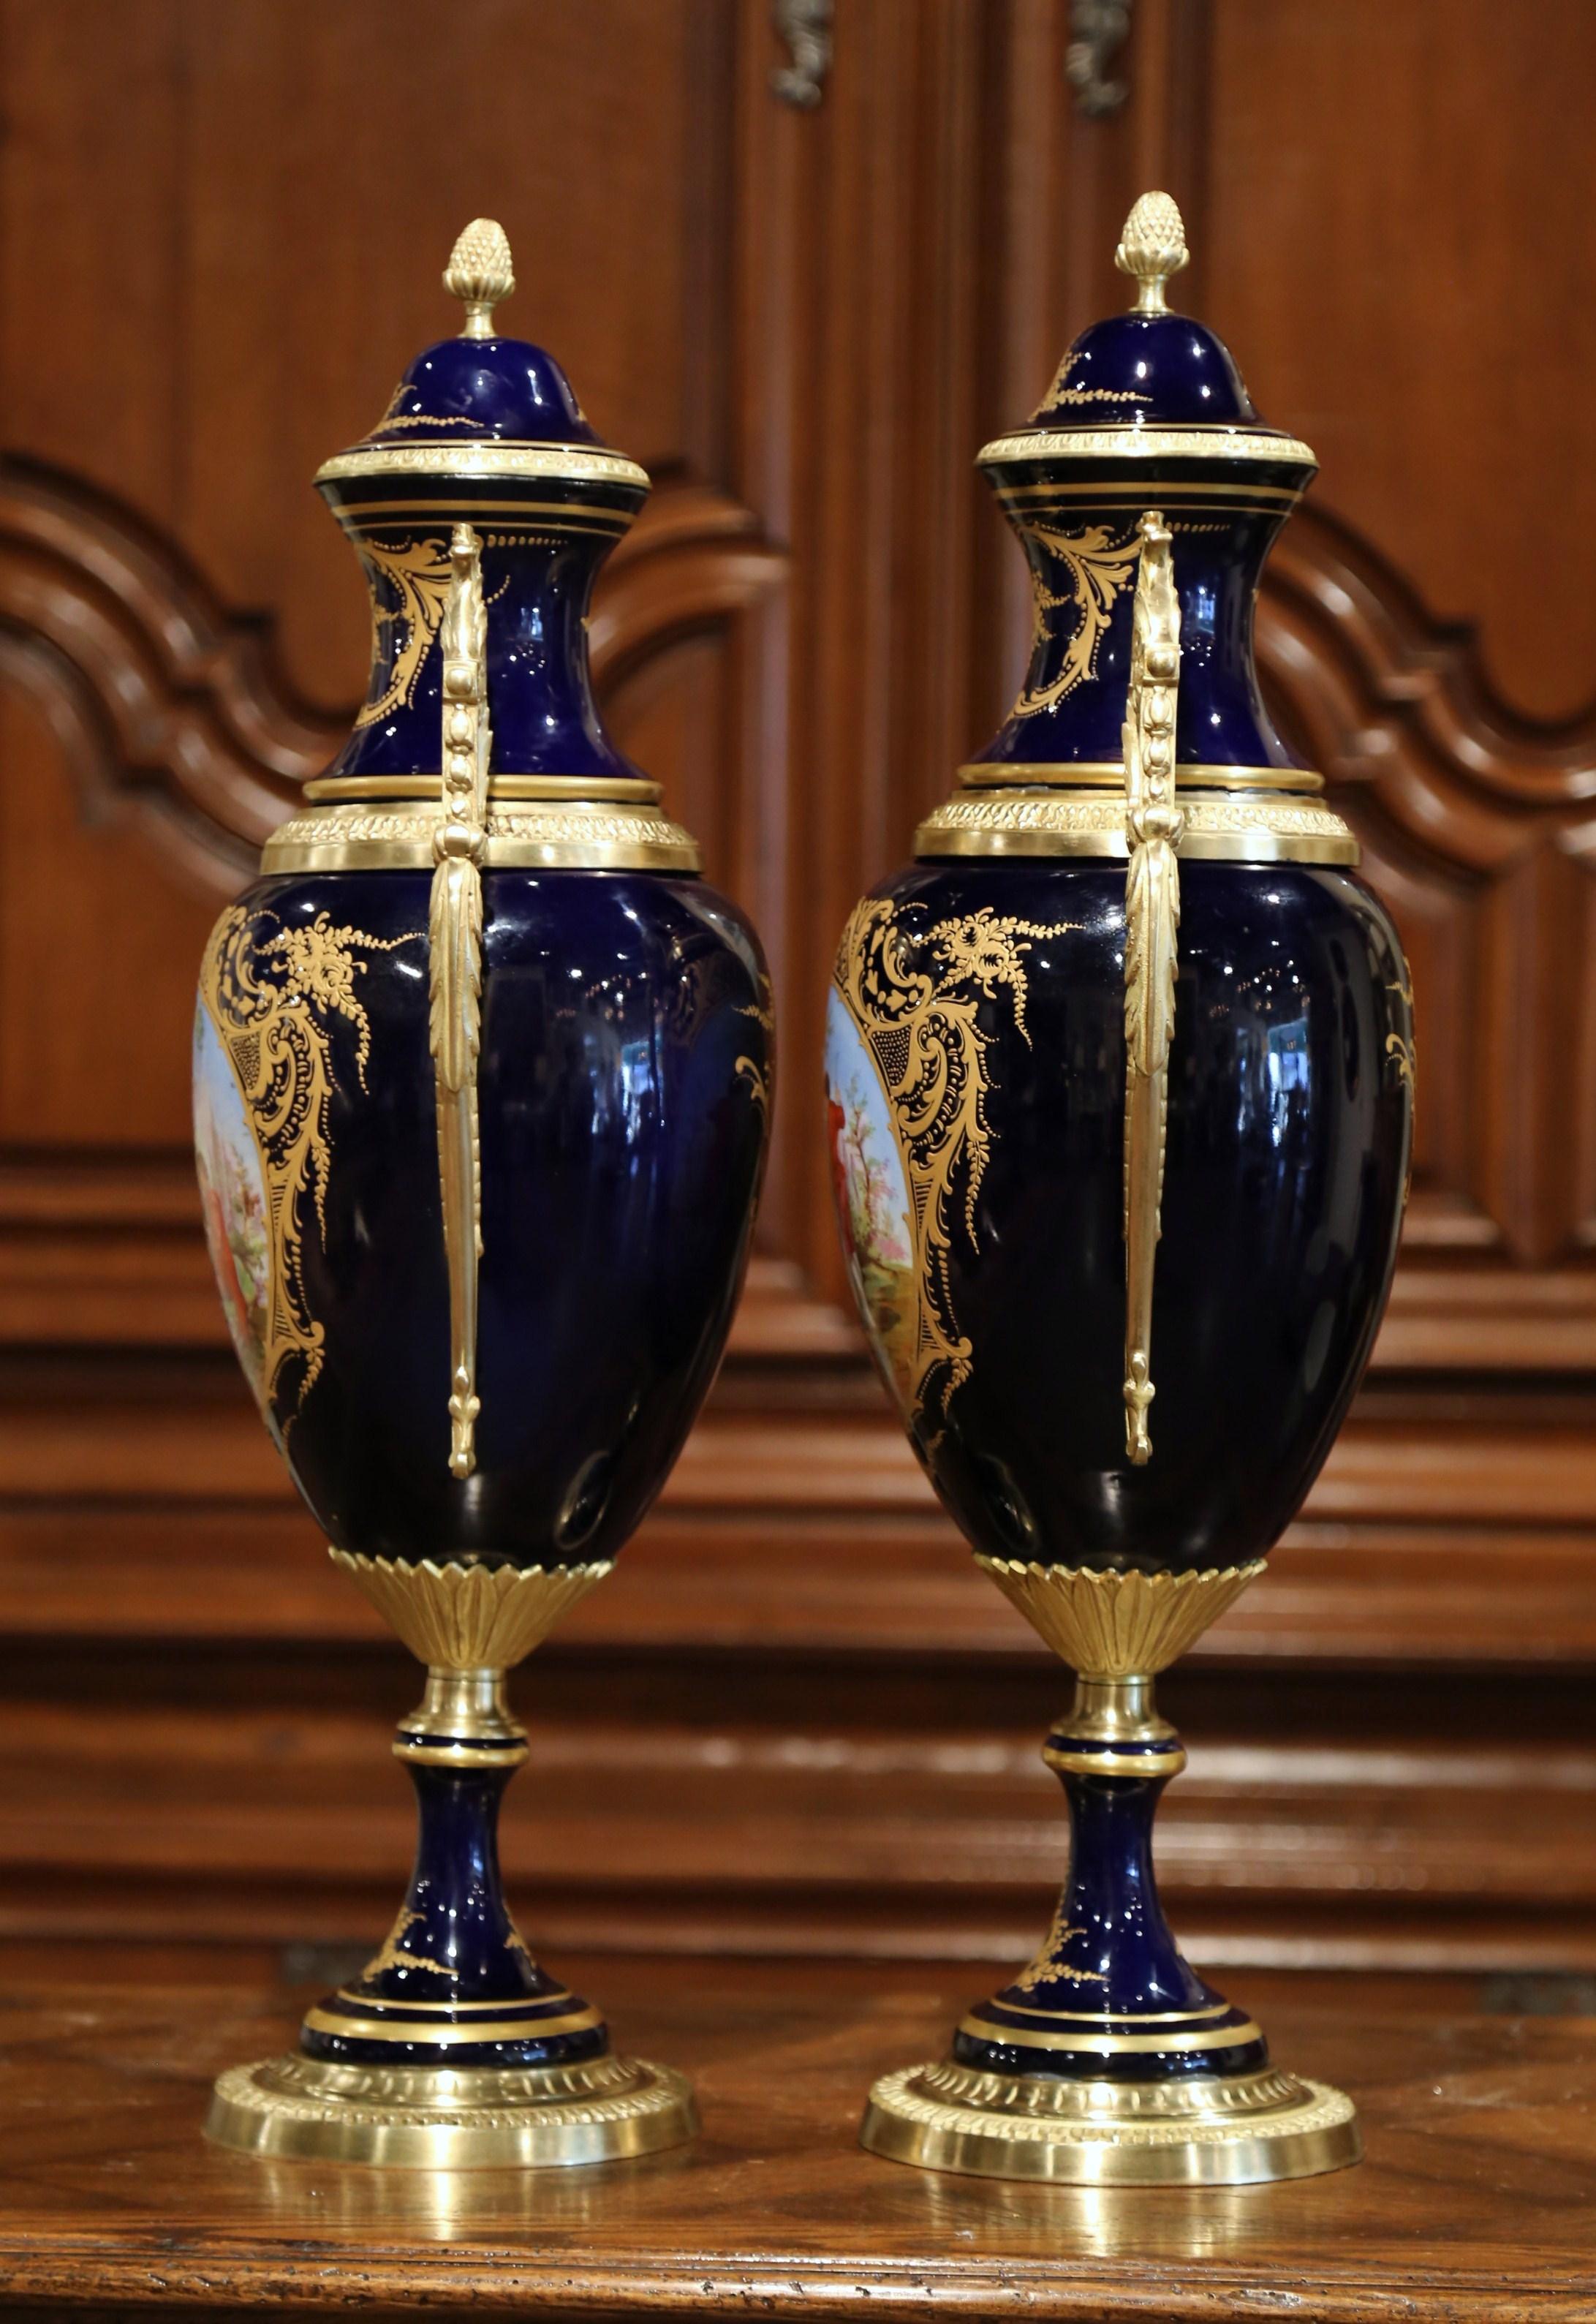 Pair of Mid-20th Century French Blue Royal Porcelain and Bronze Sèvres Urns 3